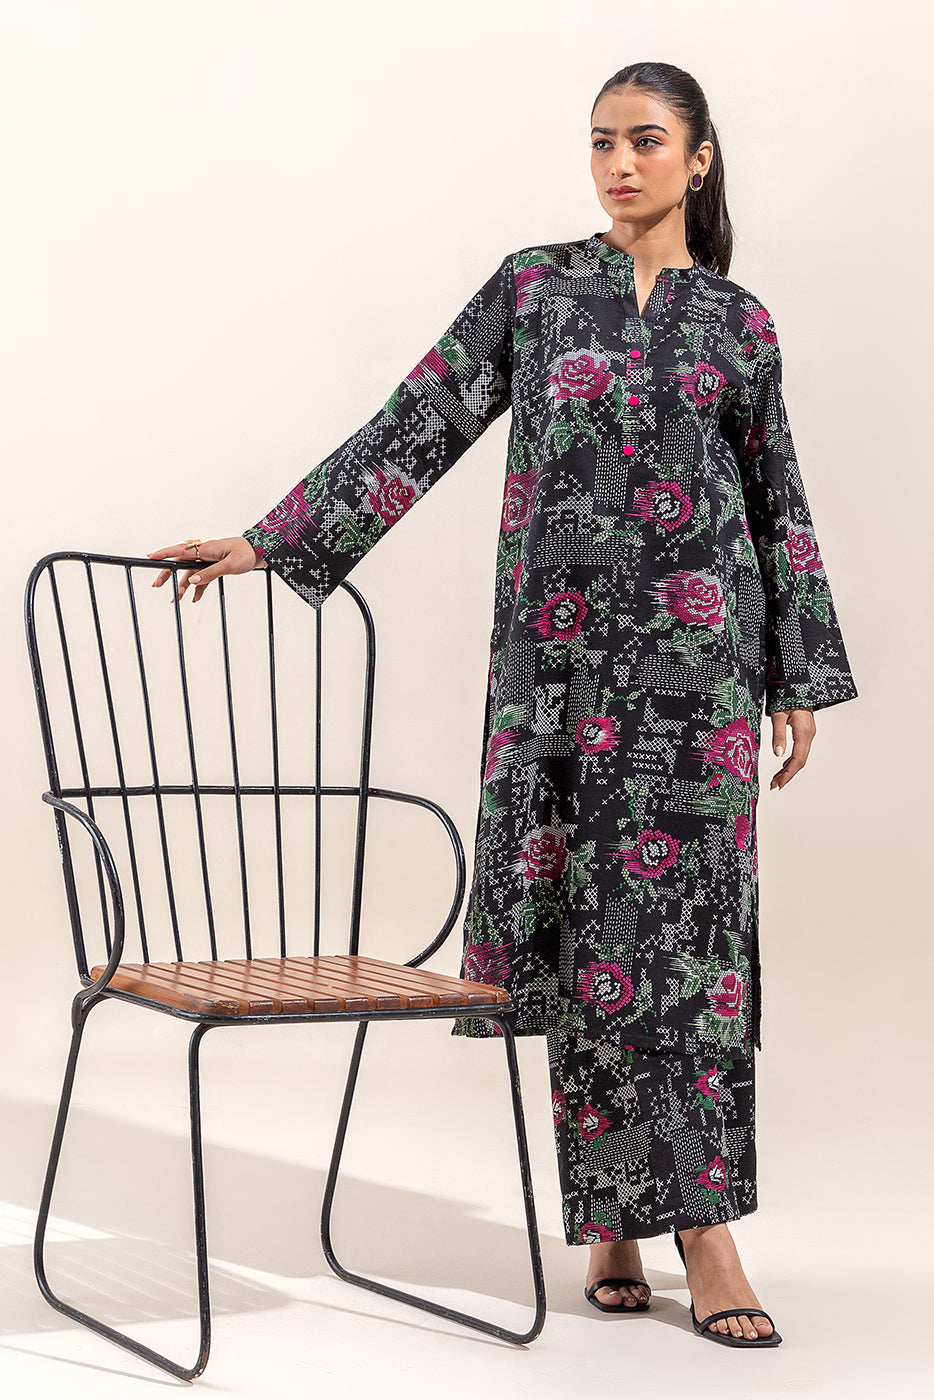 2 PIECE PRINTED LAWN SUIT-HAZED NIGHT (UNSTITCHED) - BEECHTREE